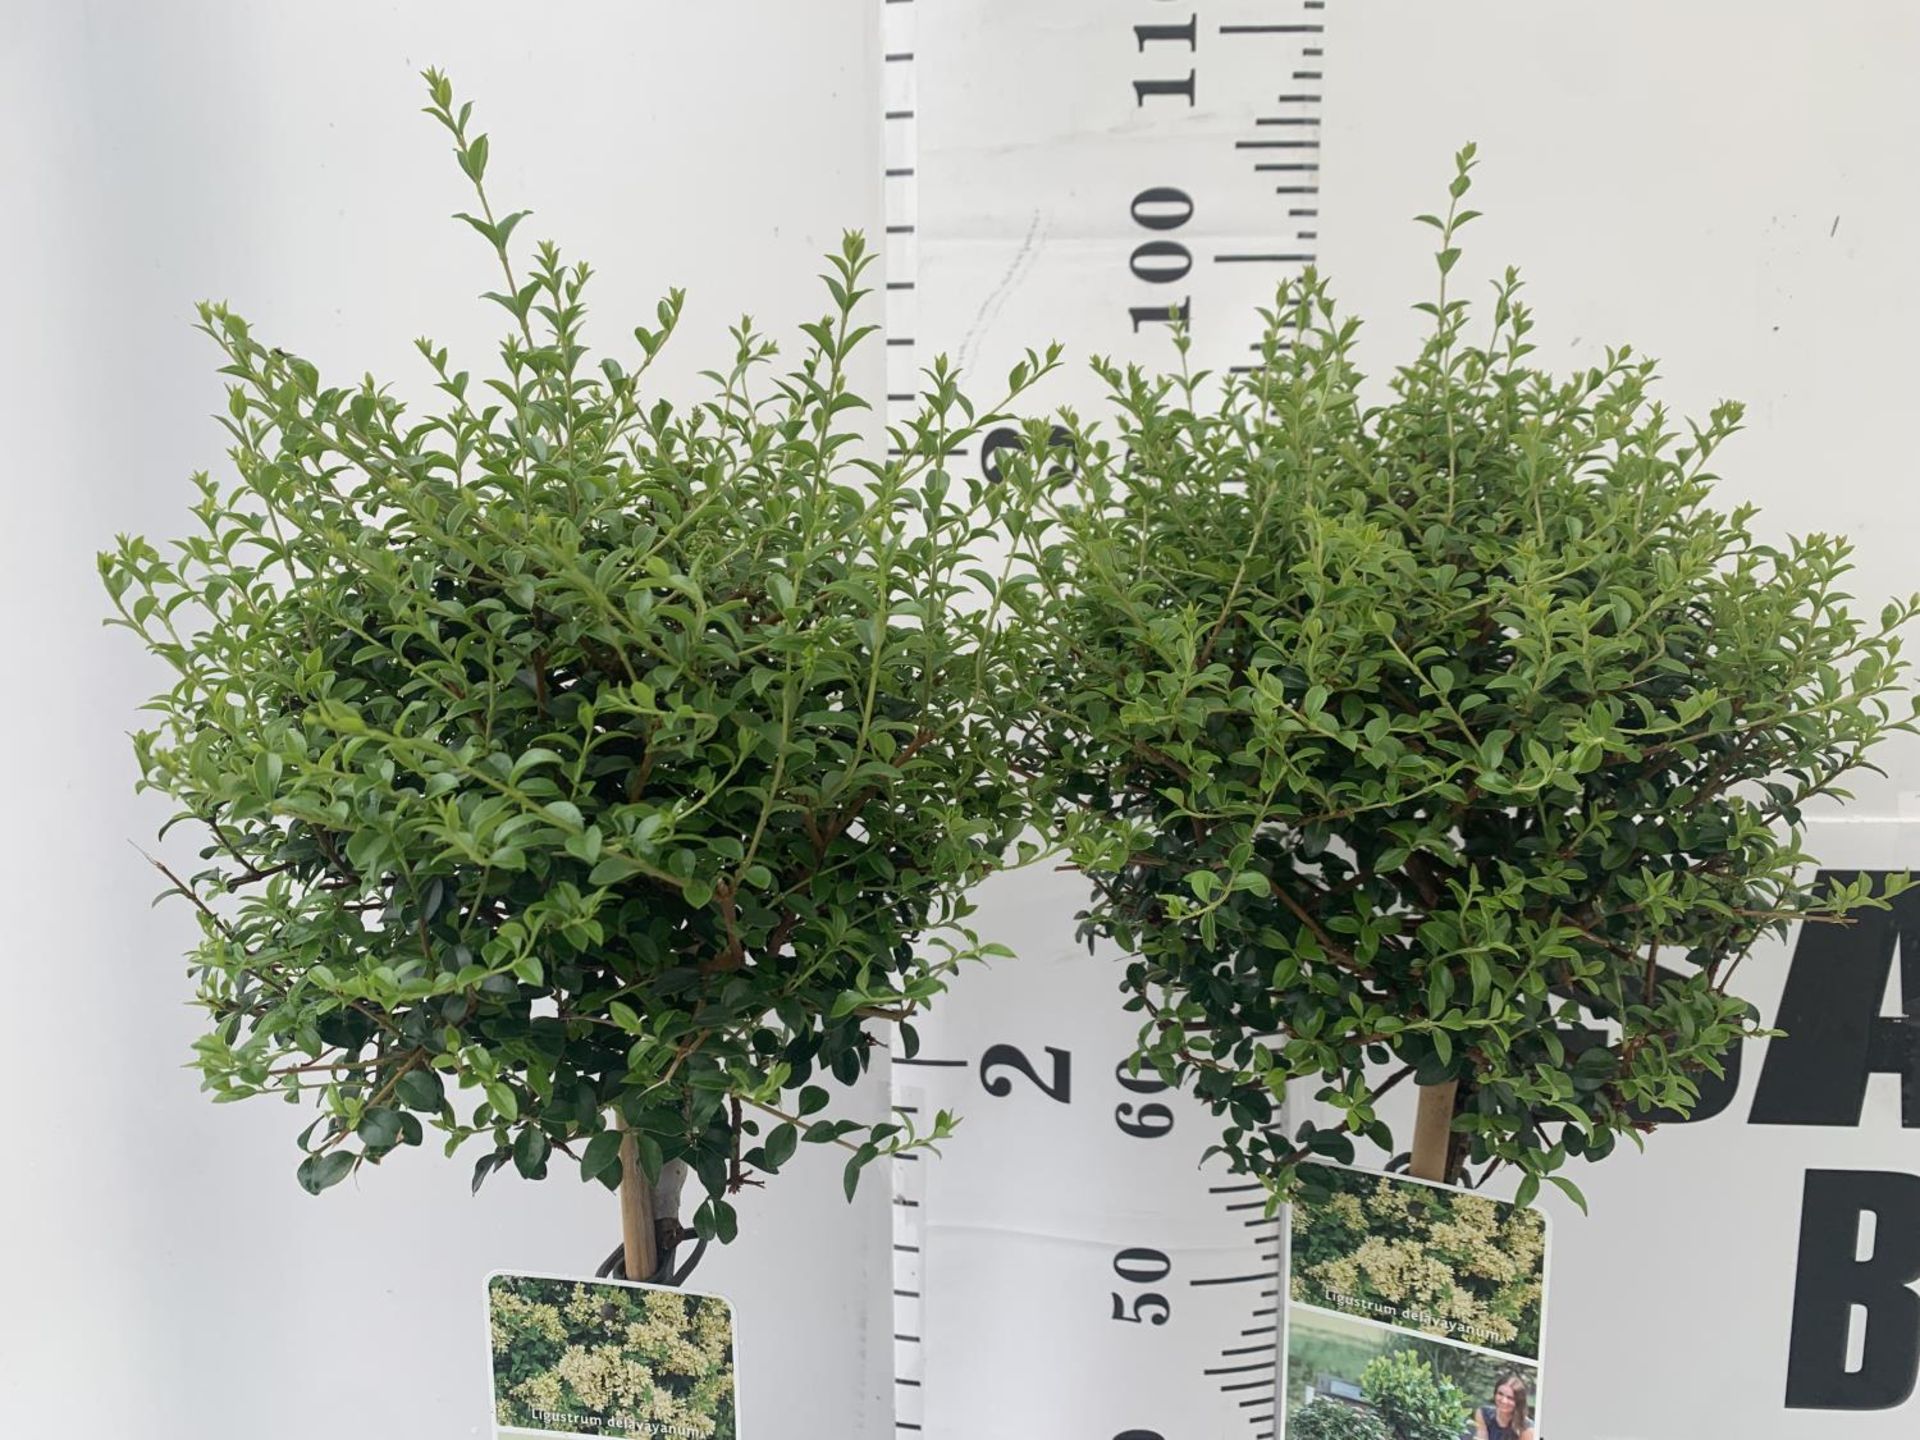 TWO LIGUSTRUM DELAVAYANUM STANDARD TREES APPROX 100CM IN HEIGHT IN 3LTR POTS PLUS VAT TO BE SOLD FOR - Image 2 of 5